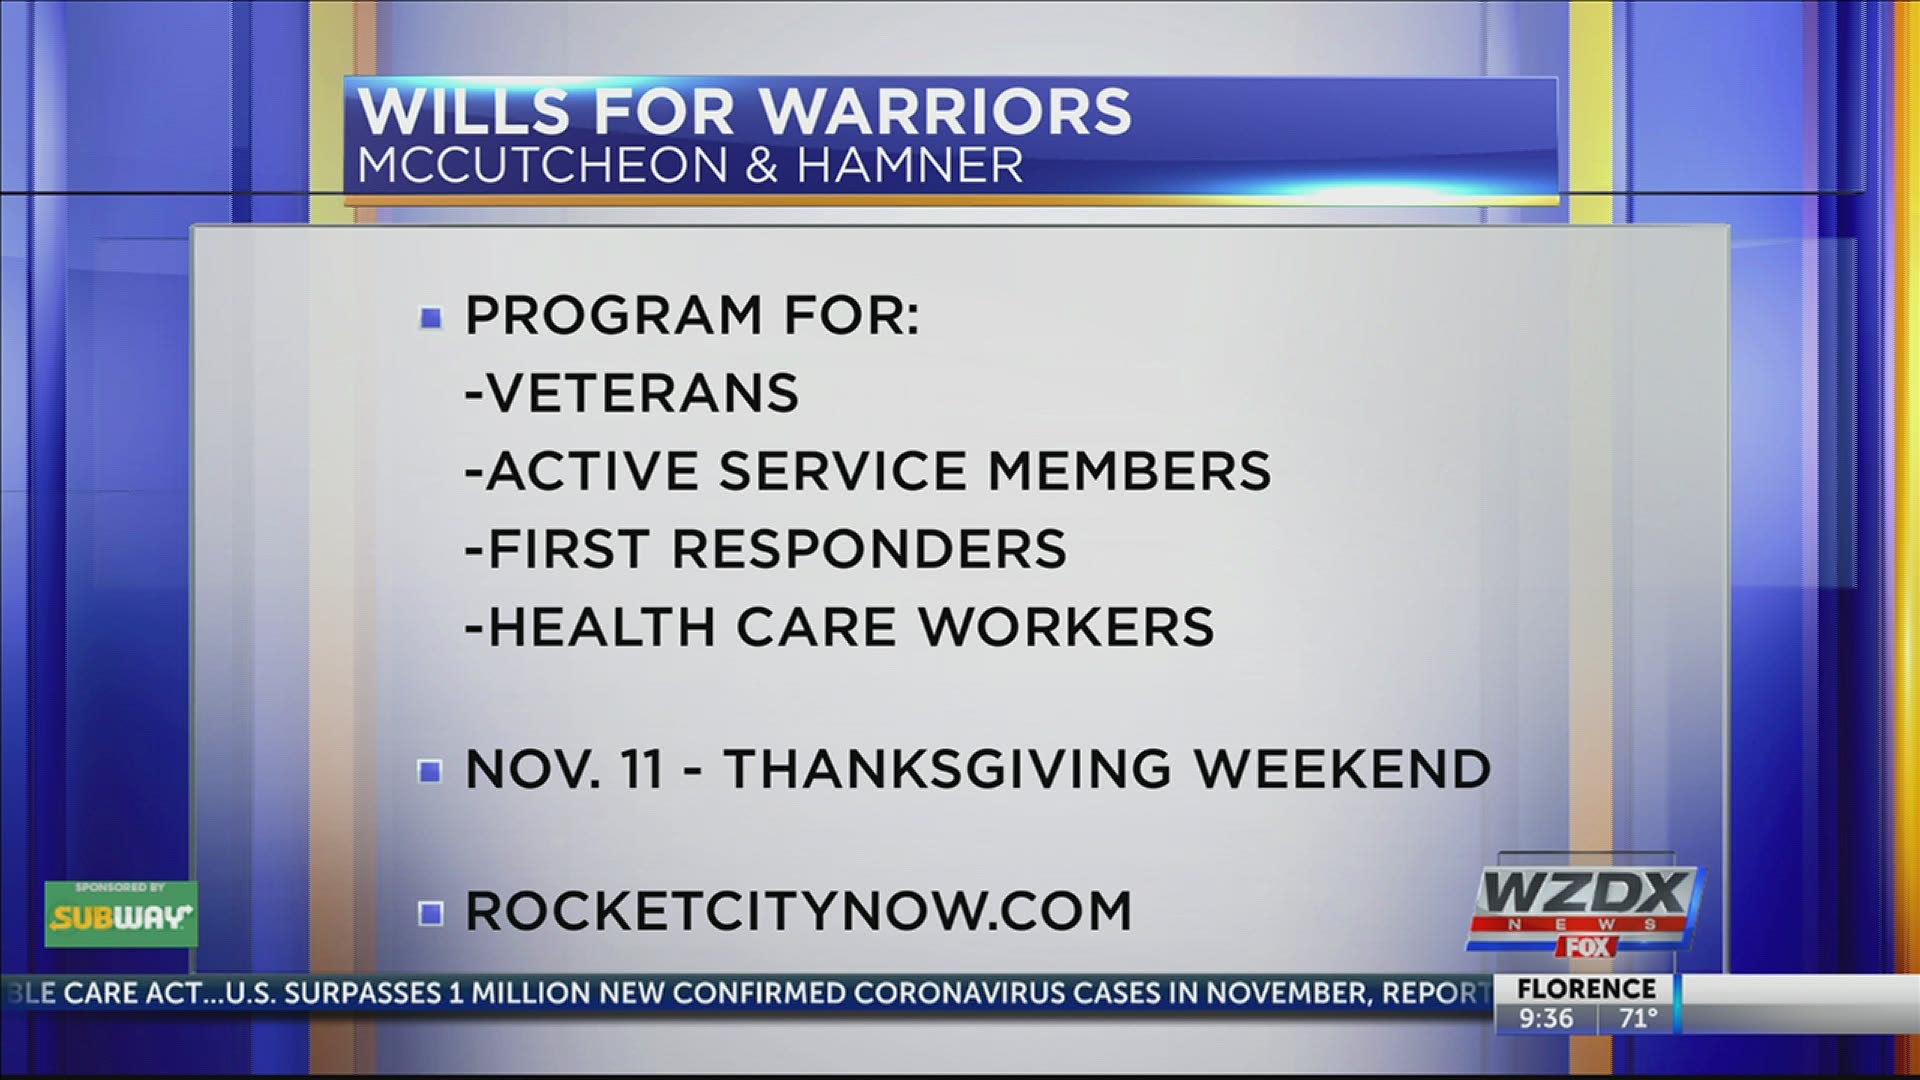 A local law firm is offering free wills and other services as part of their Wills for Warriors program from Veterans Day 2020 through Thanksgiving weekend.